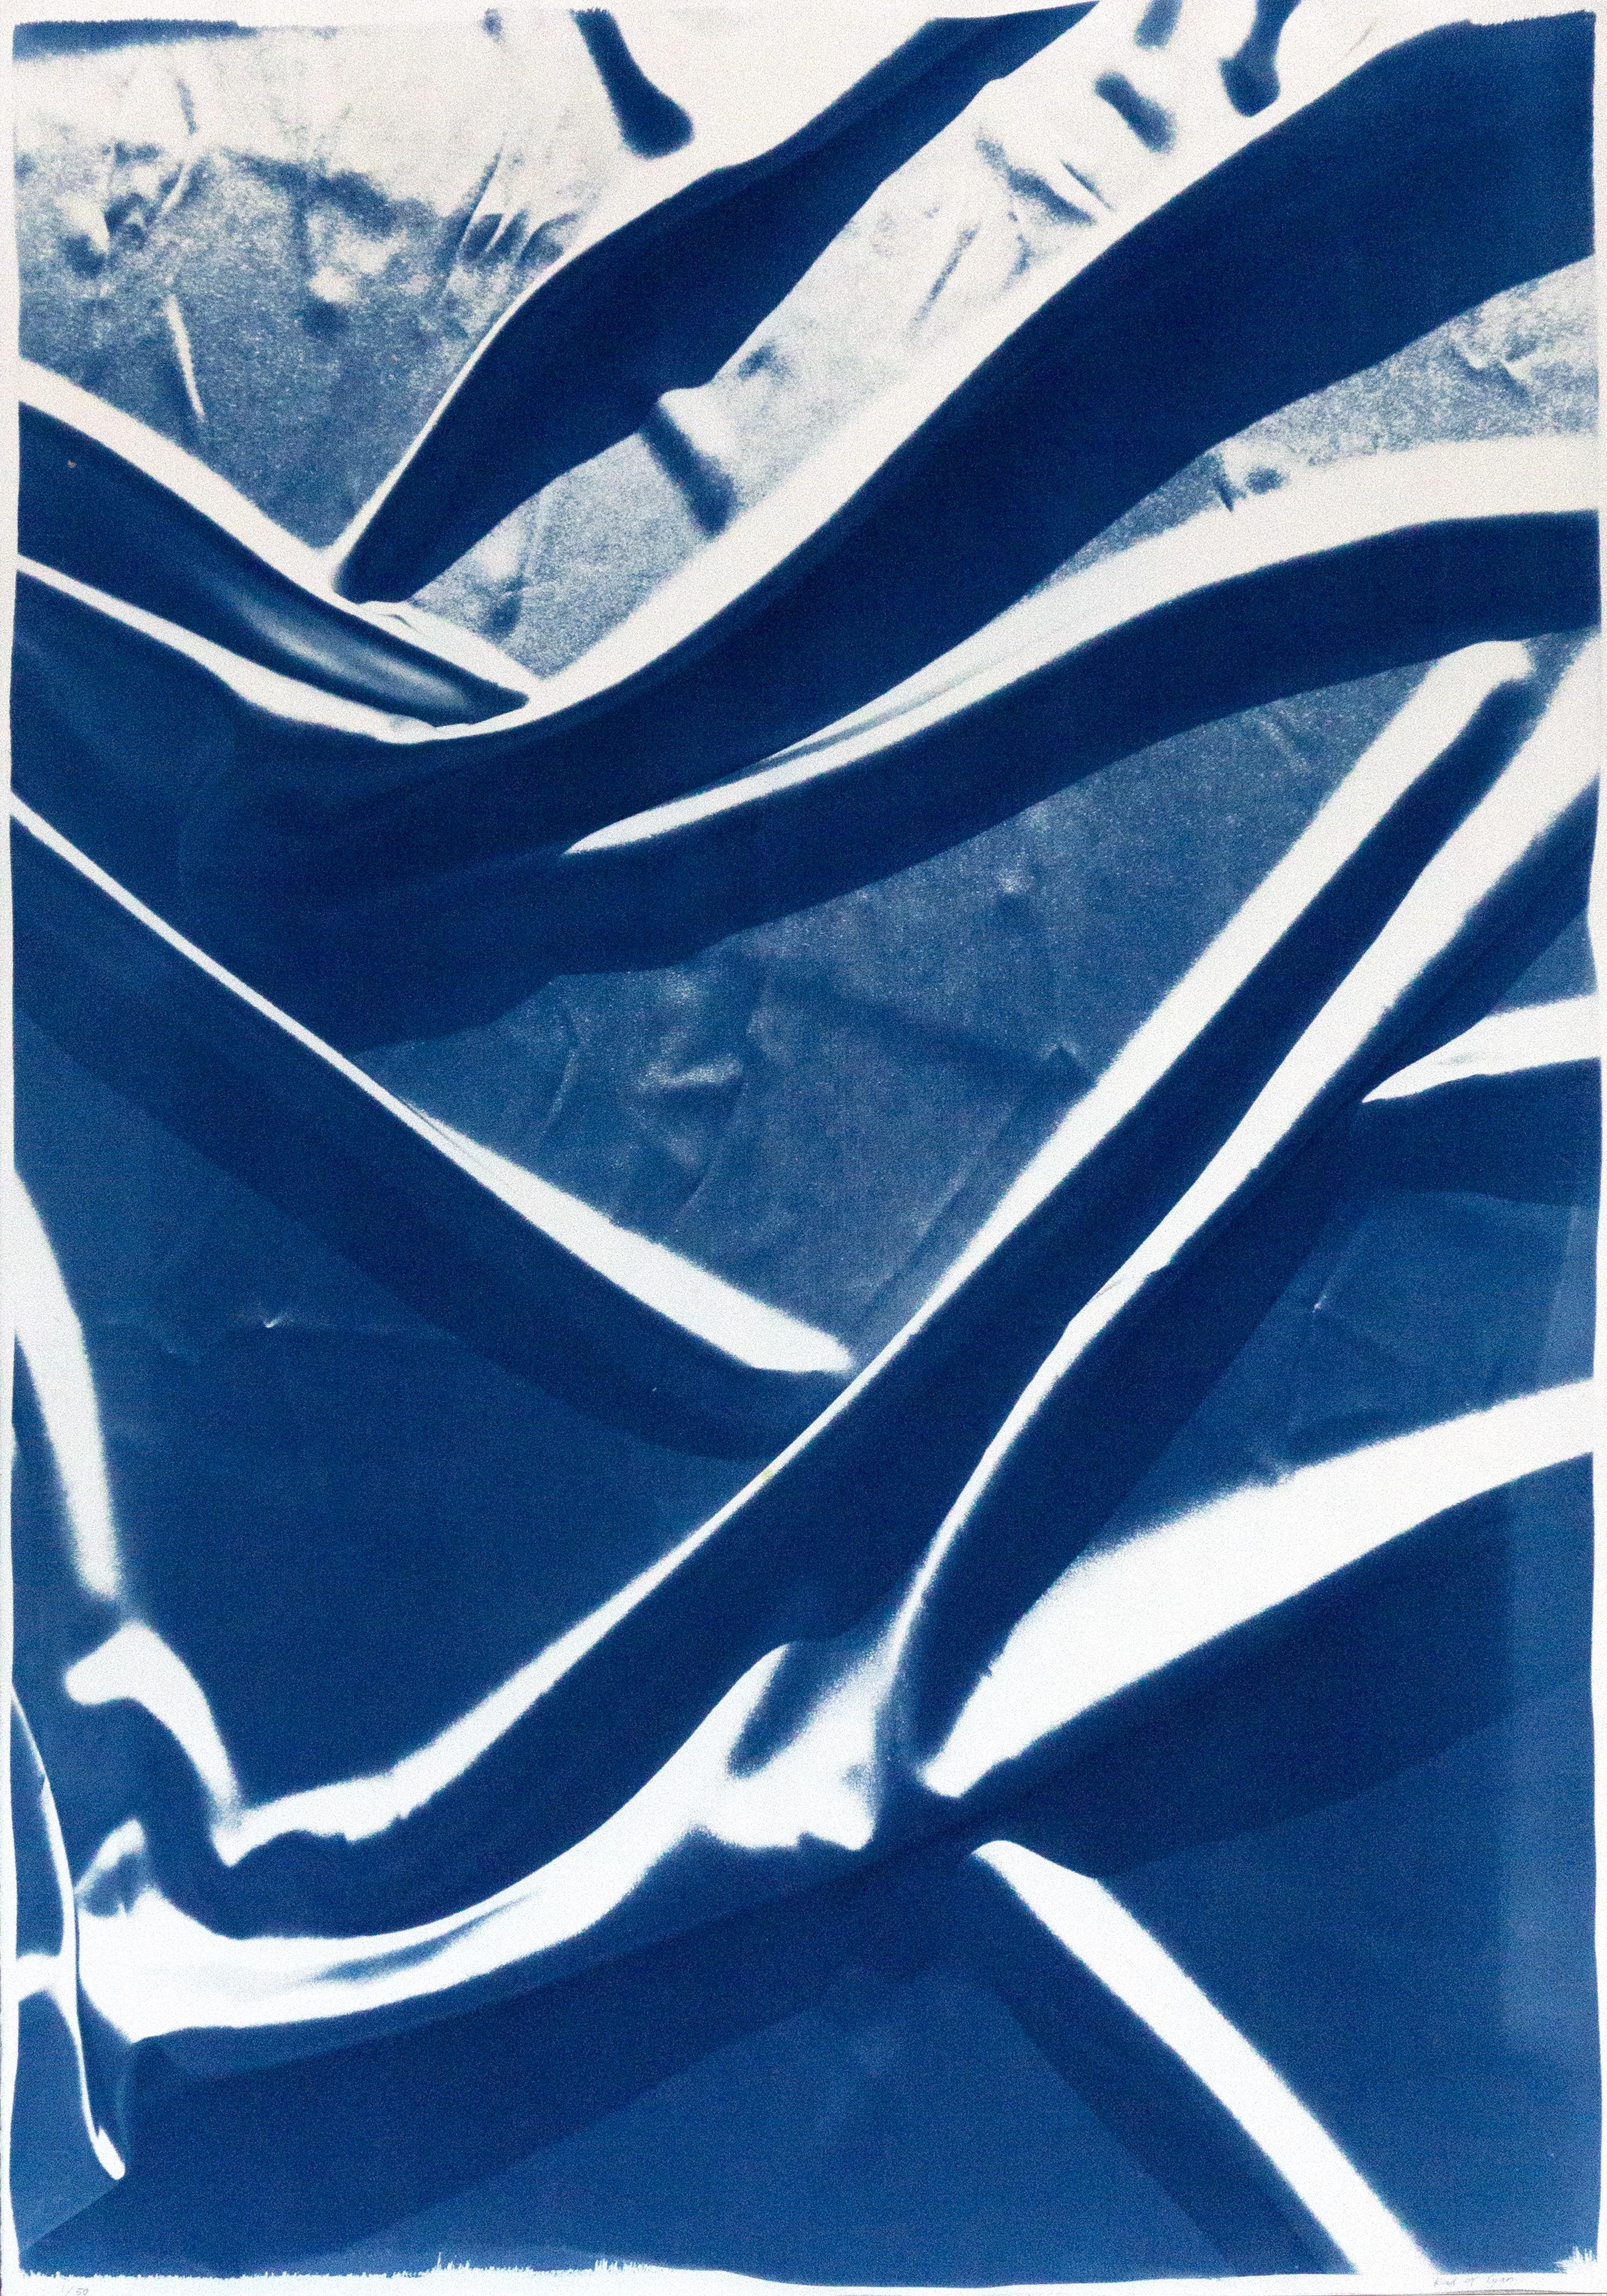 Kind of Cyan Abstract Print - Classic Blue Patterns, Handmade Cyanotype, Abstract Smooth Silk Fabric on Paper